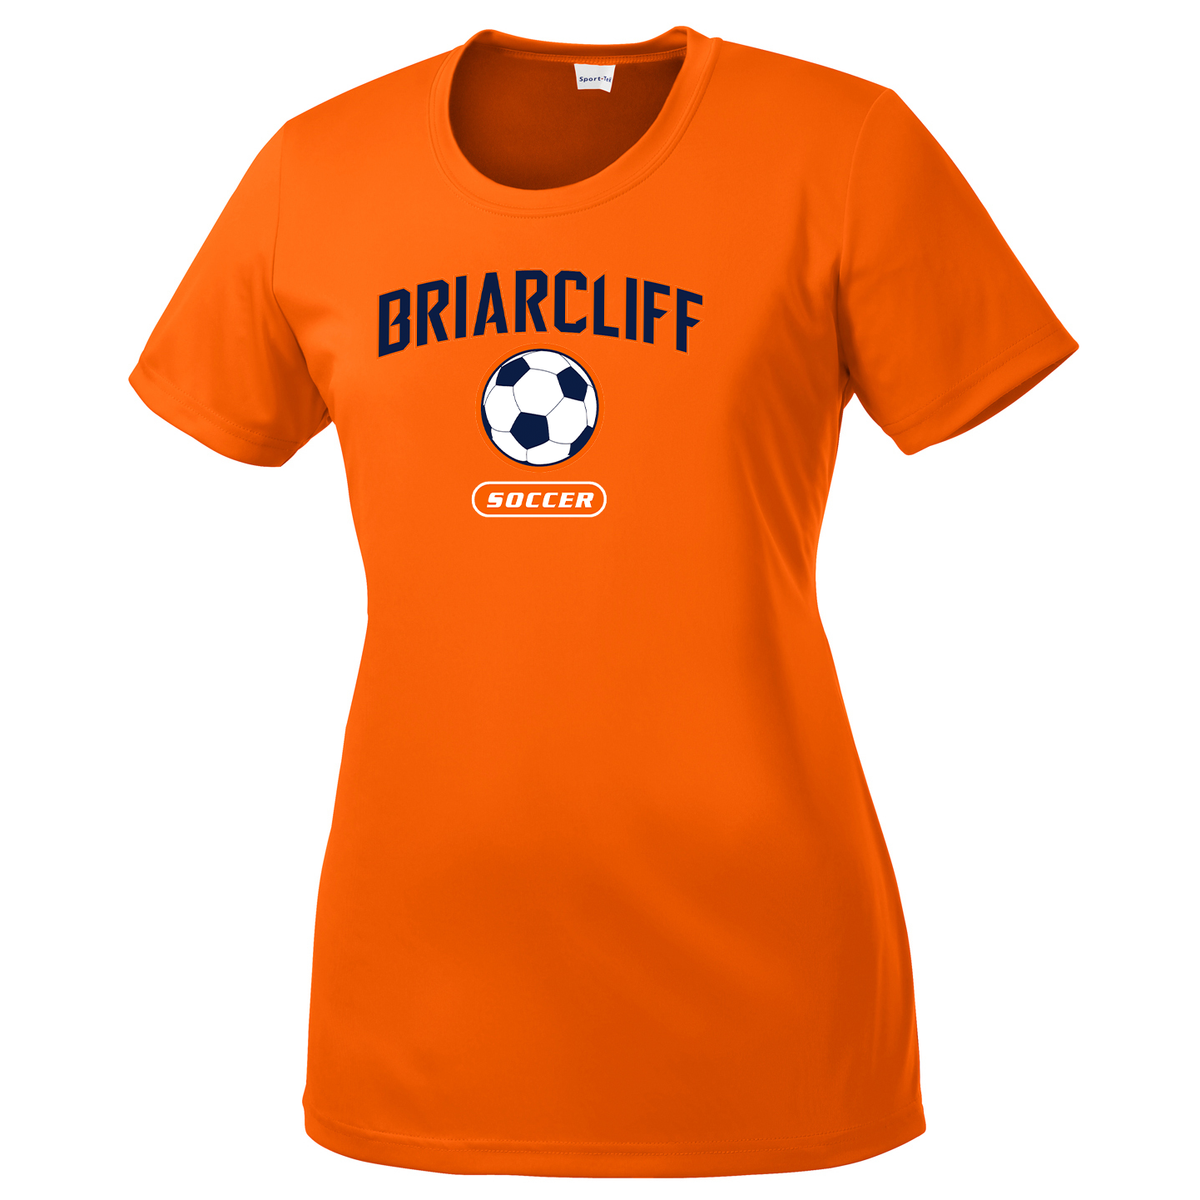 Briarcliff Soccer Women's Performance Tee